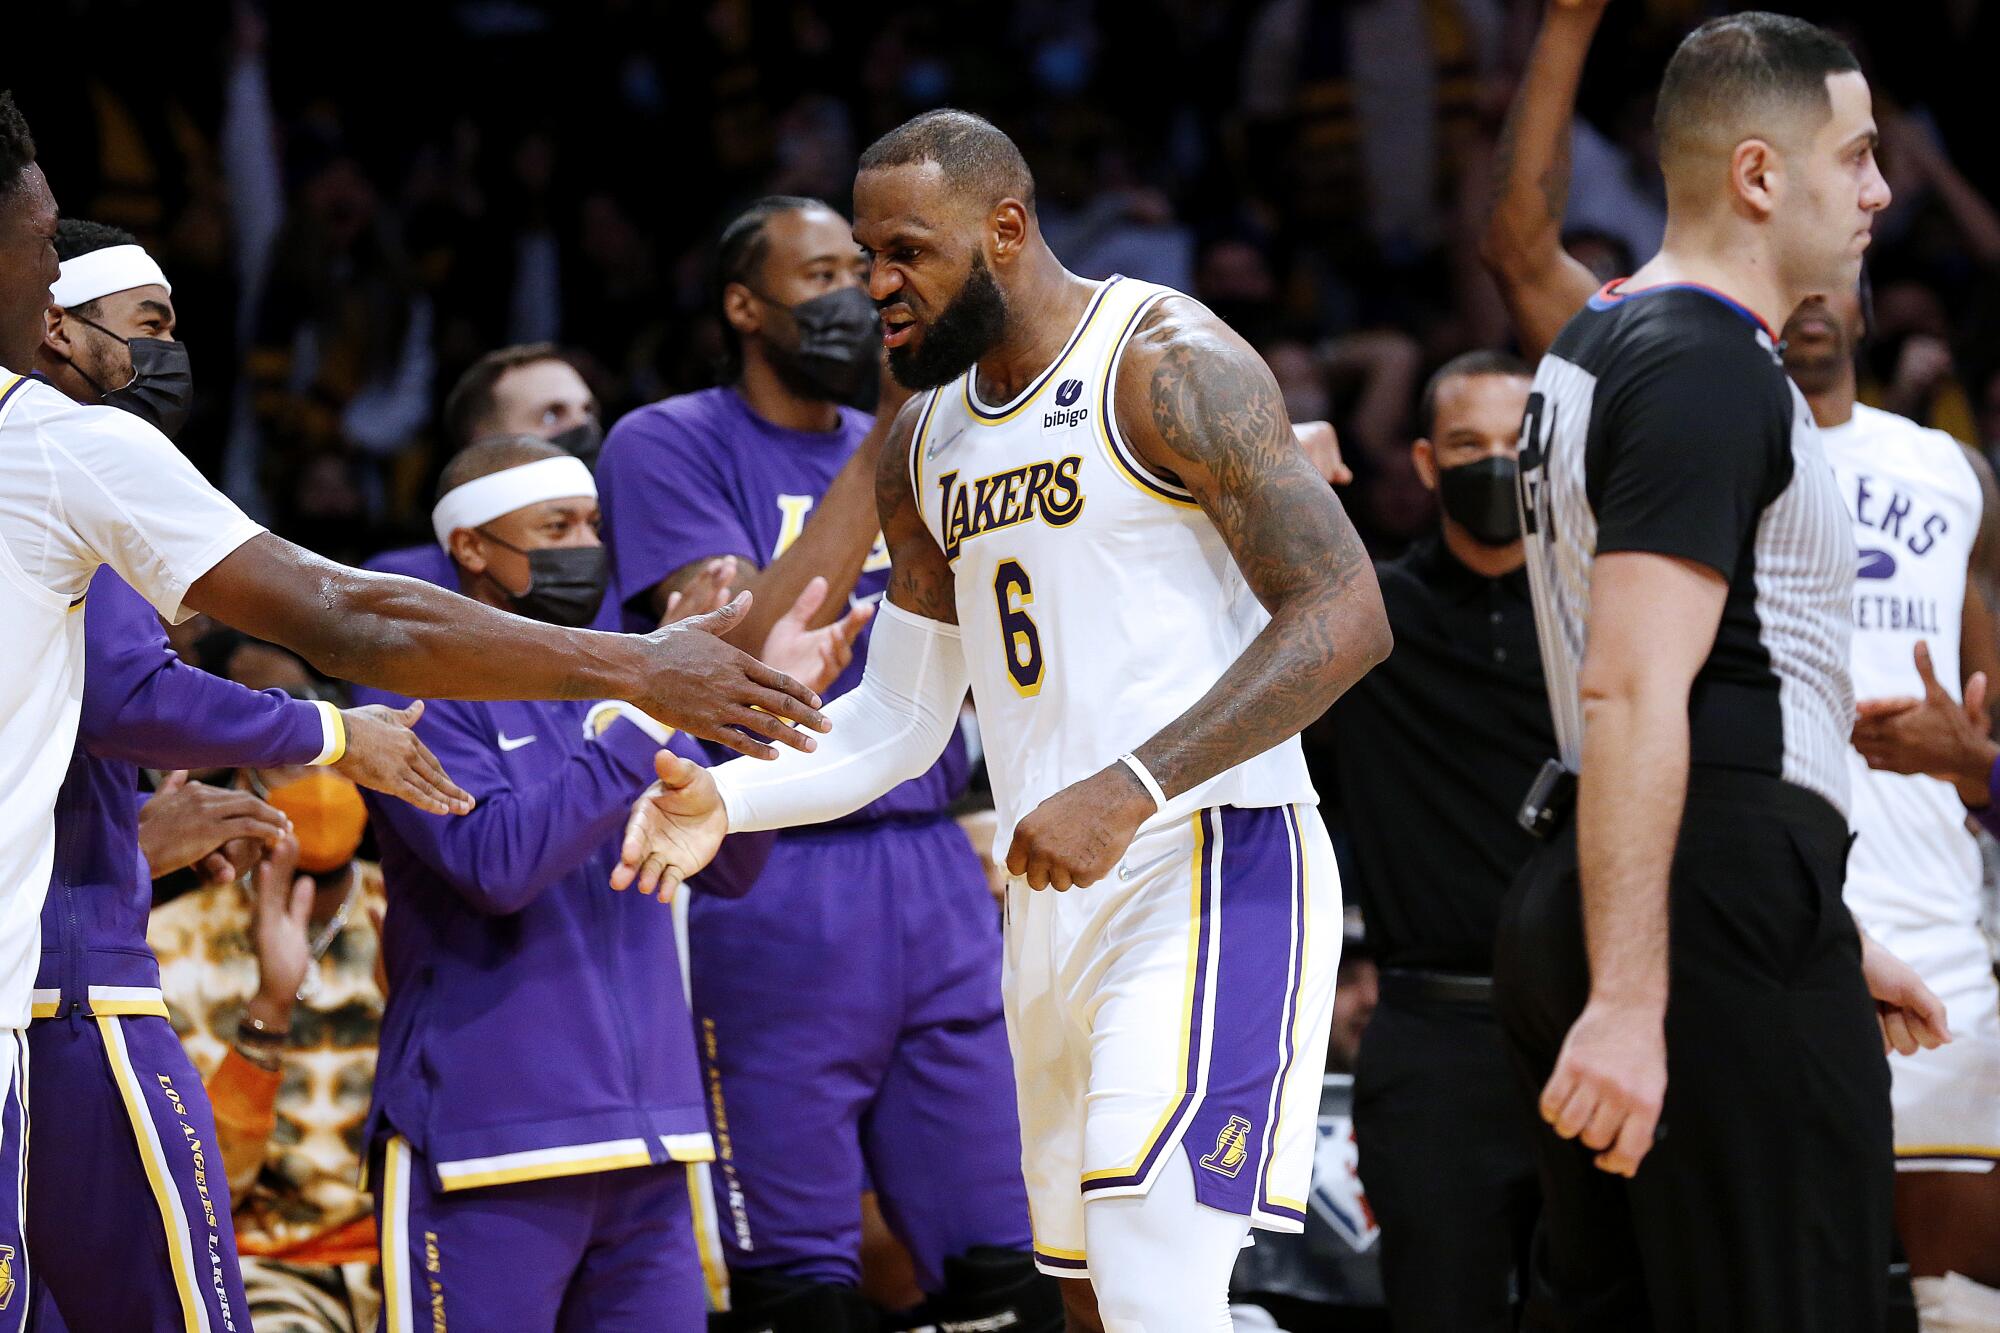 Lakers forward LeBron James celebrates after scoring a basket against the Brooklyn Nets in the first half.